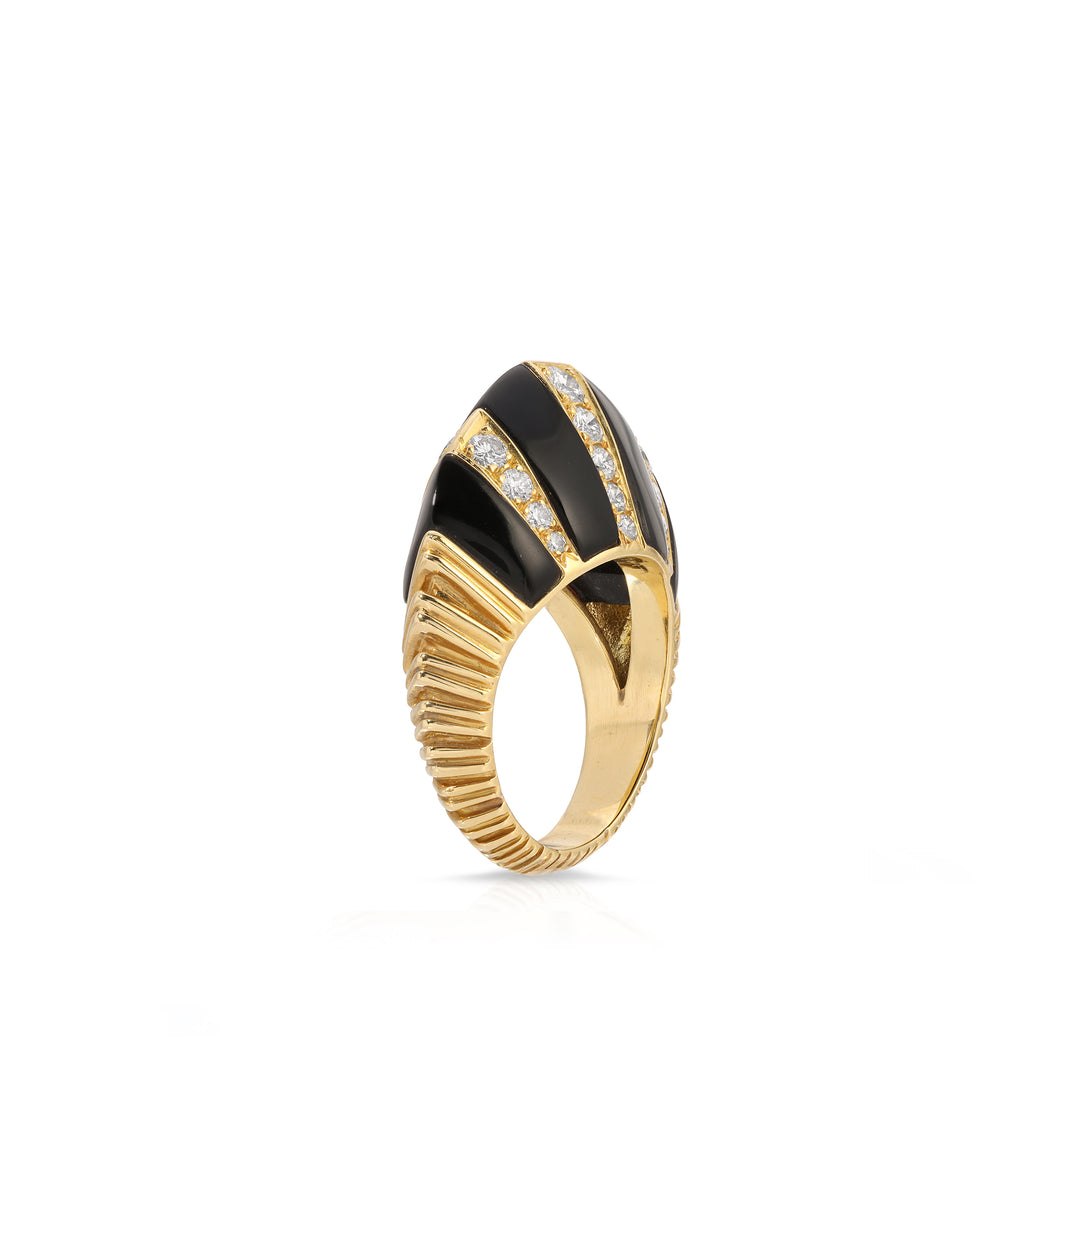 Onyx & Diamond Fanned Dome Ring in 18K Gold